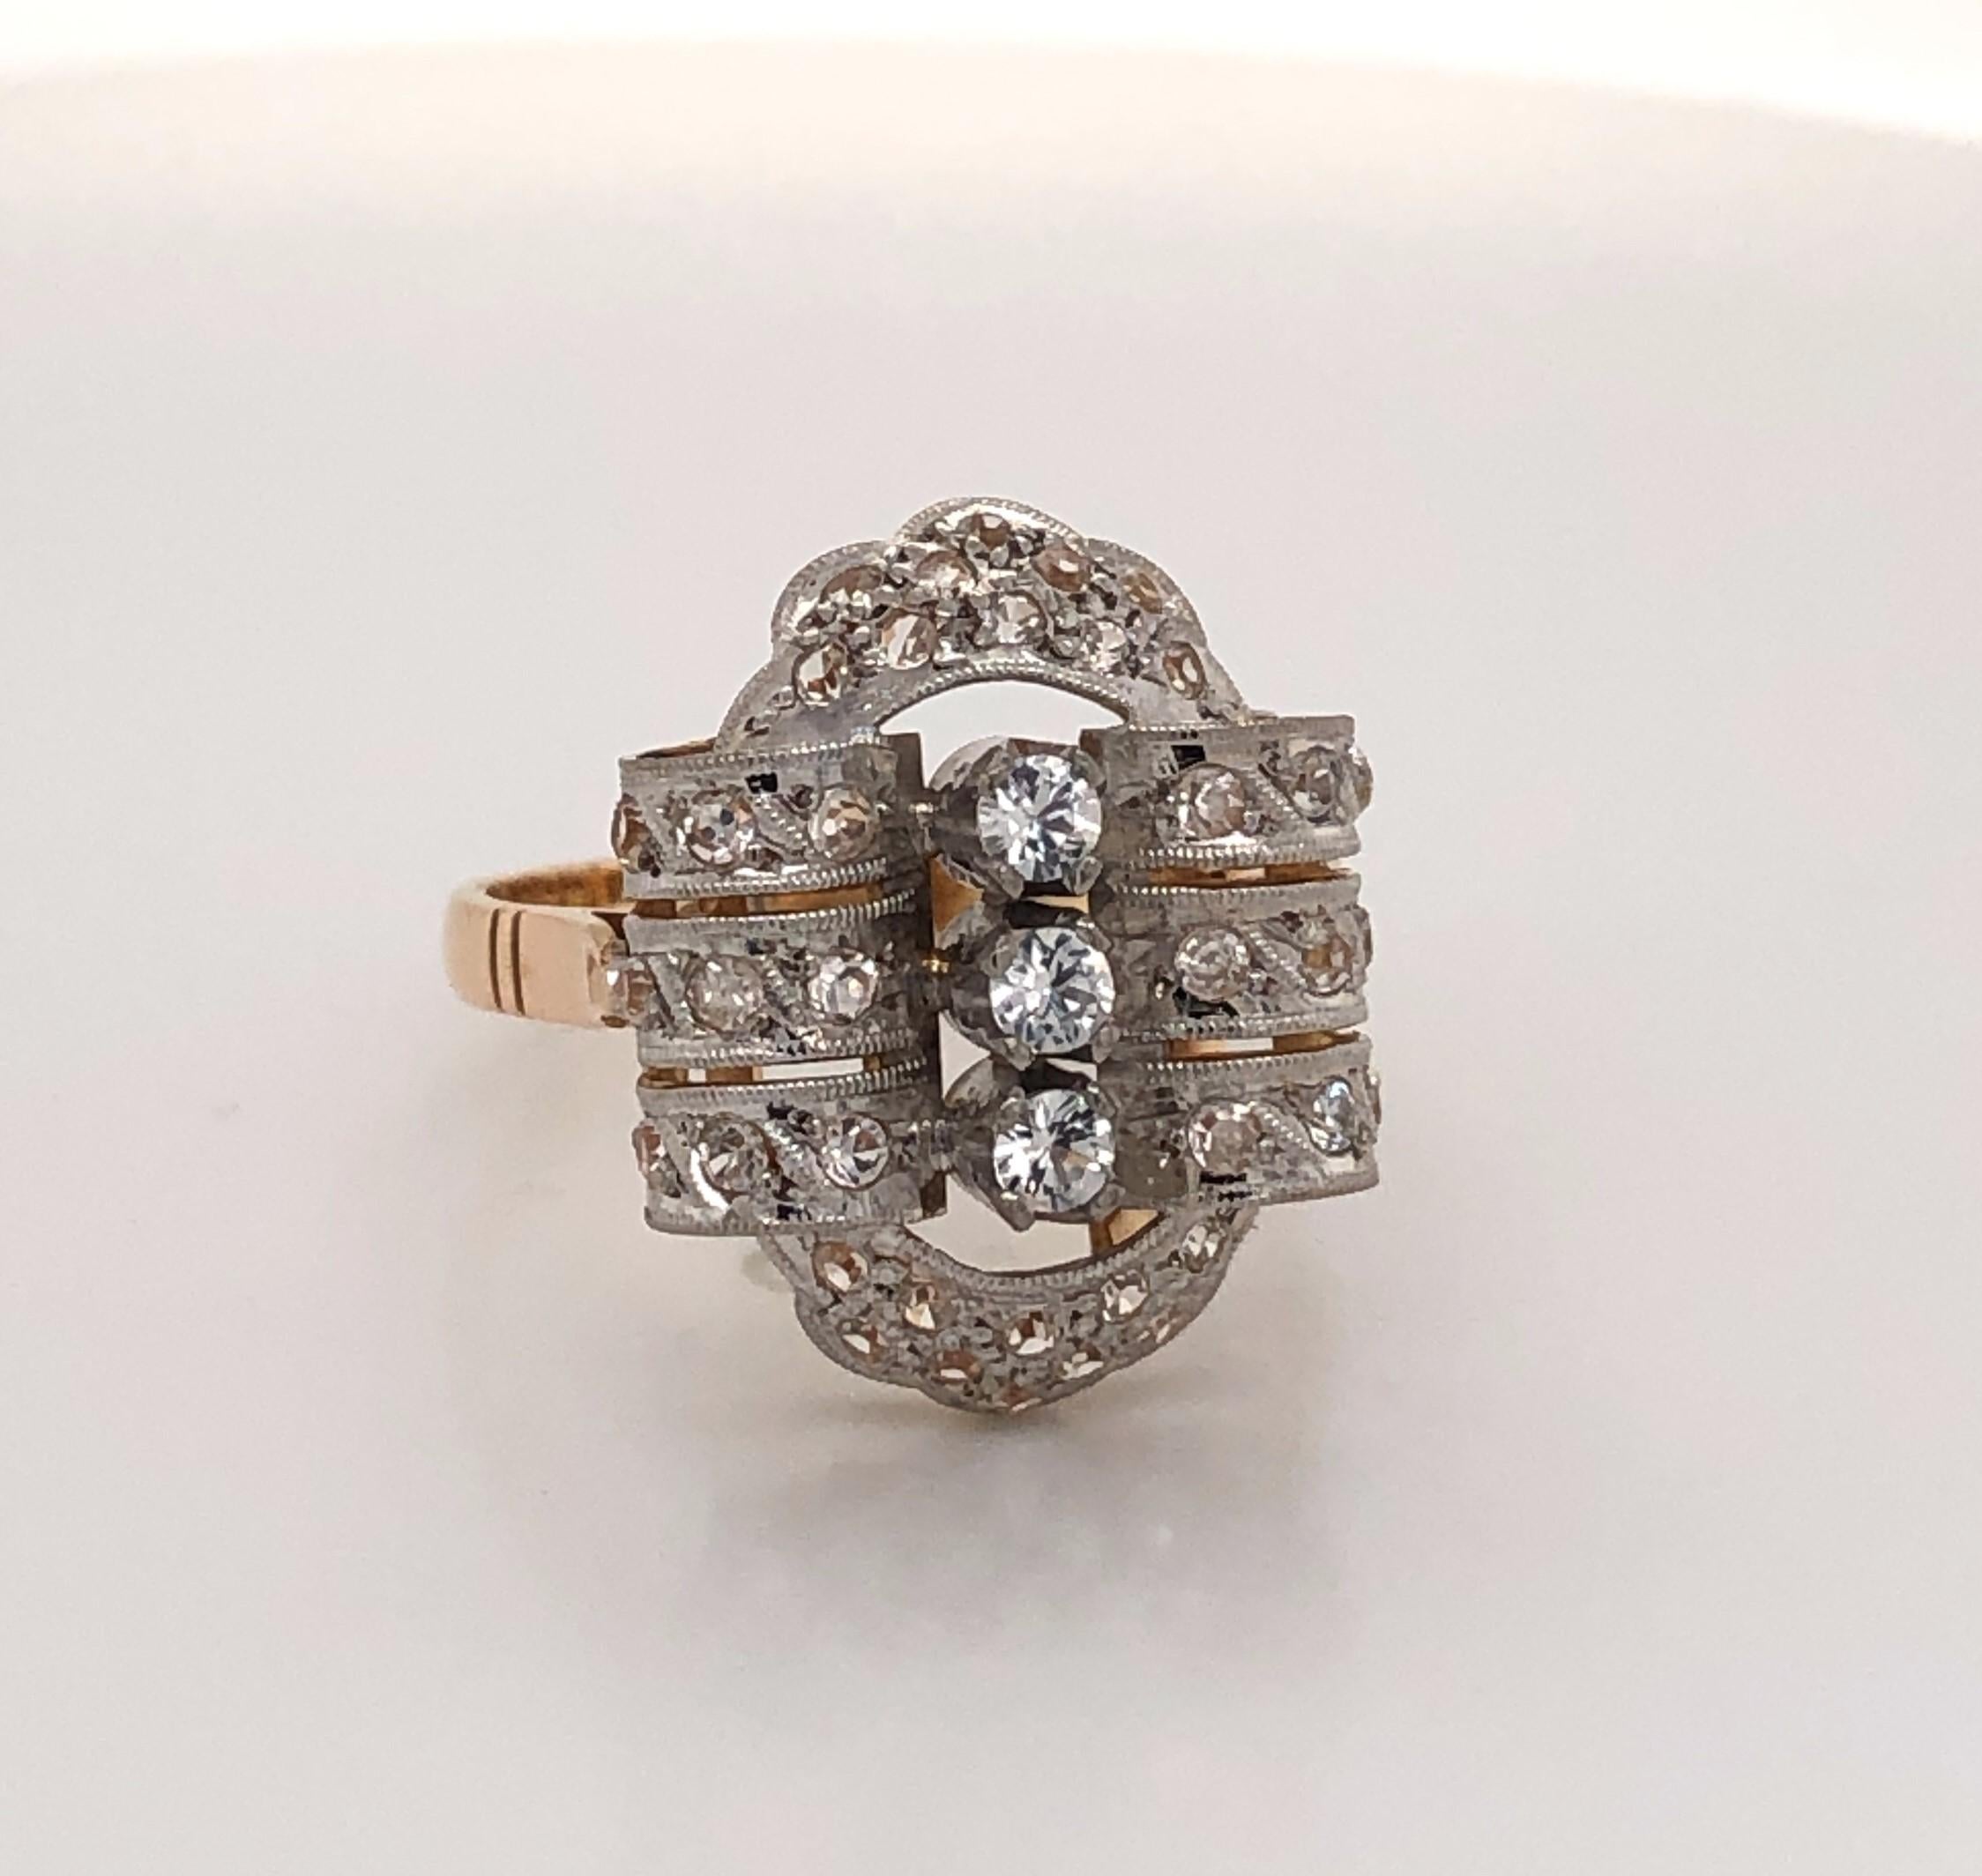 Elegant 1920's antique ladies ring with over small forty diamonds at just under half carat total weight.  The ring features three prong-set center  diamonds that are vertically mounted in white gold and framed by an intricate diamond covered oval